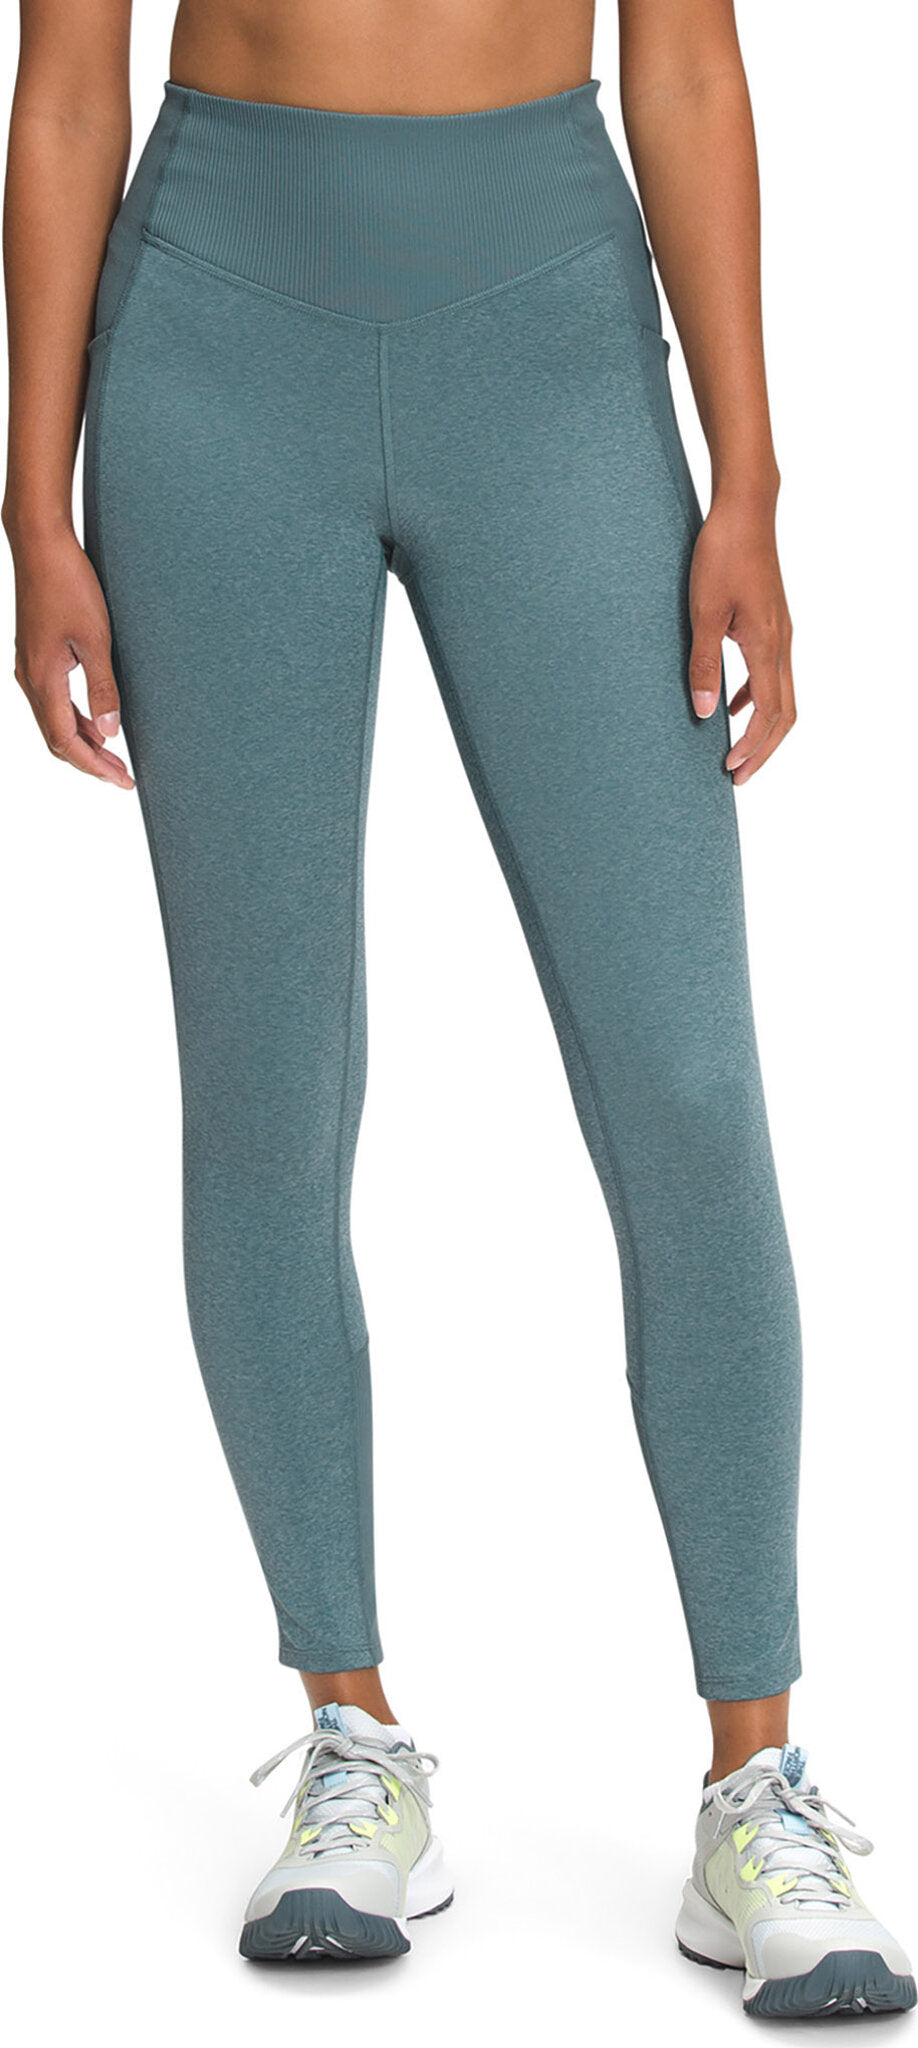 Women’s Dune Sky Tights | The North Face Canada